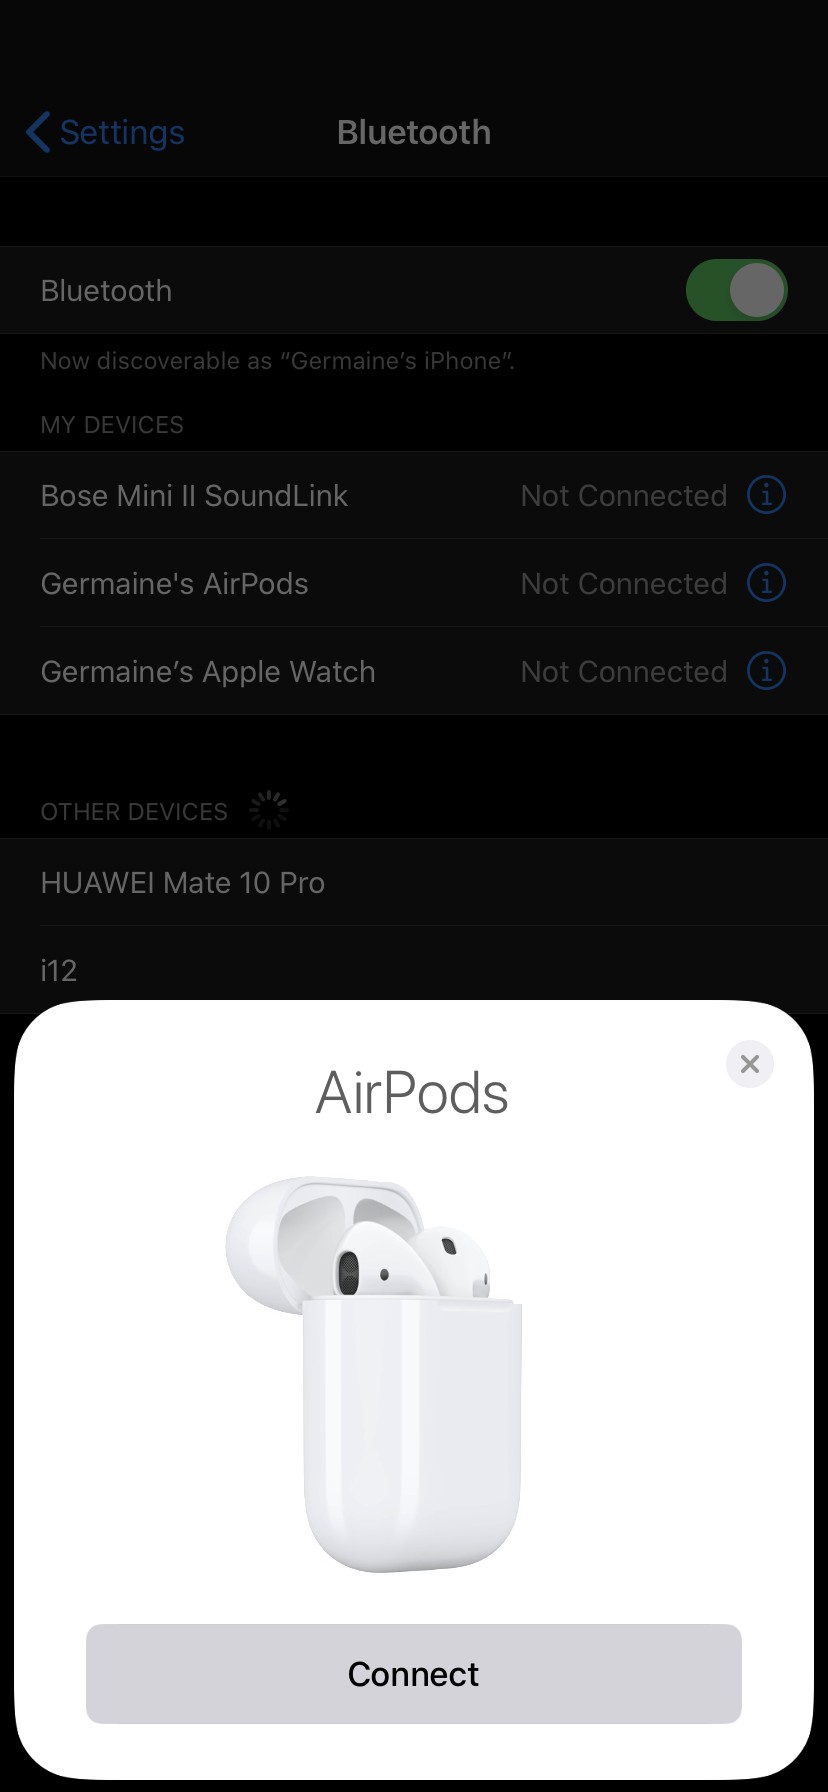 Fake AirPods Are The Market - We Bought A Pair And This What We Found | Geek Culture